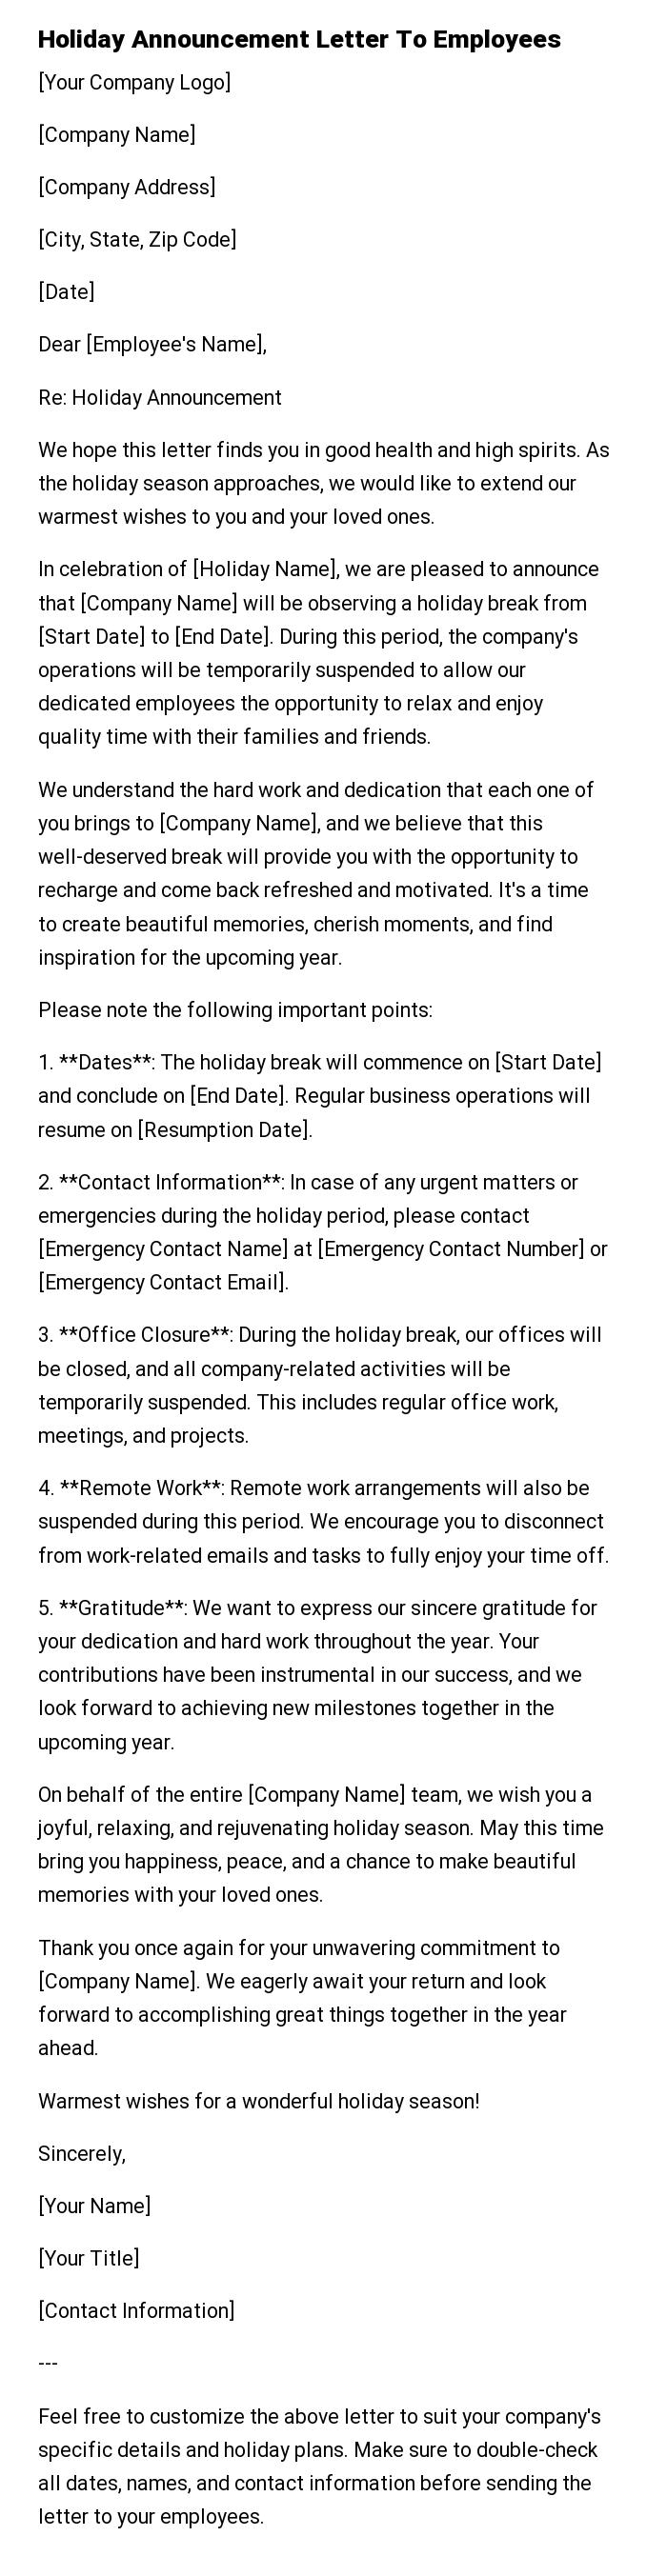 Holiday Announcement Letter To Employees